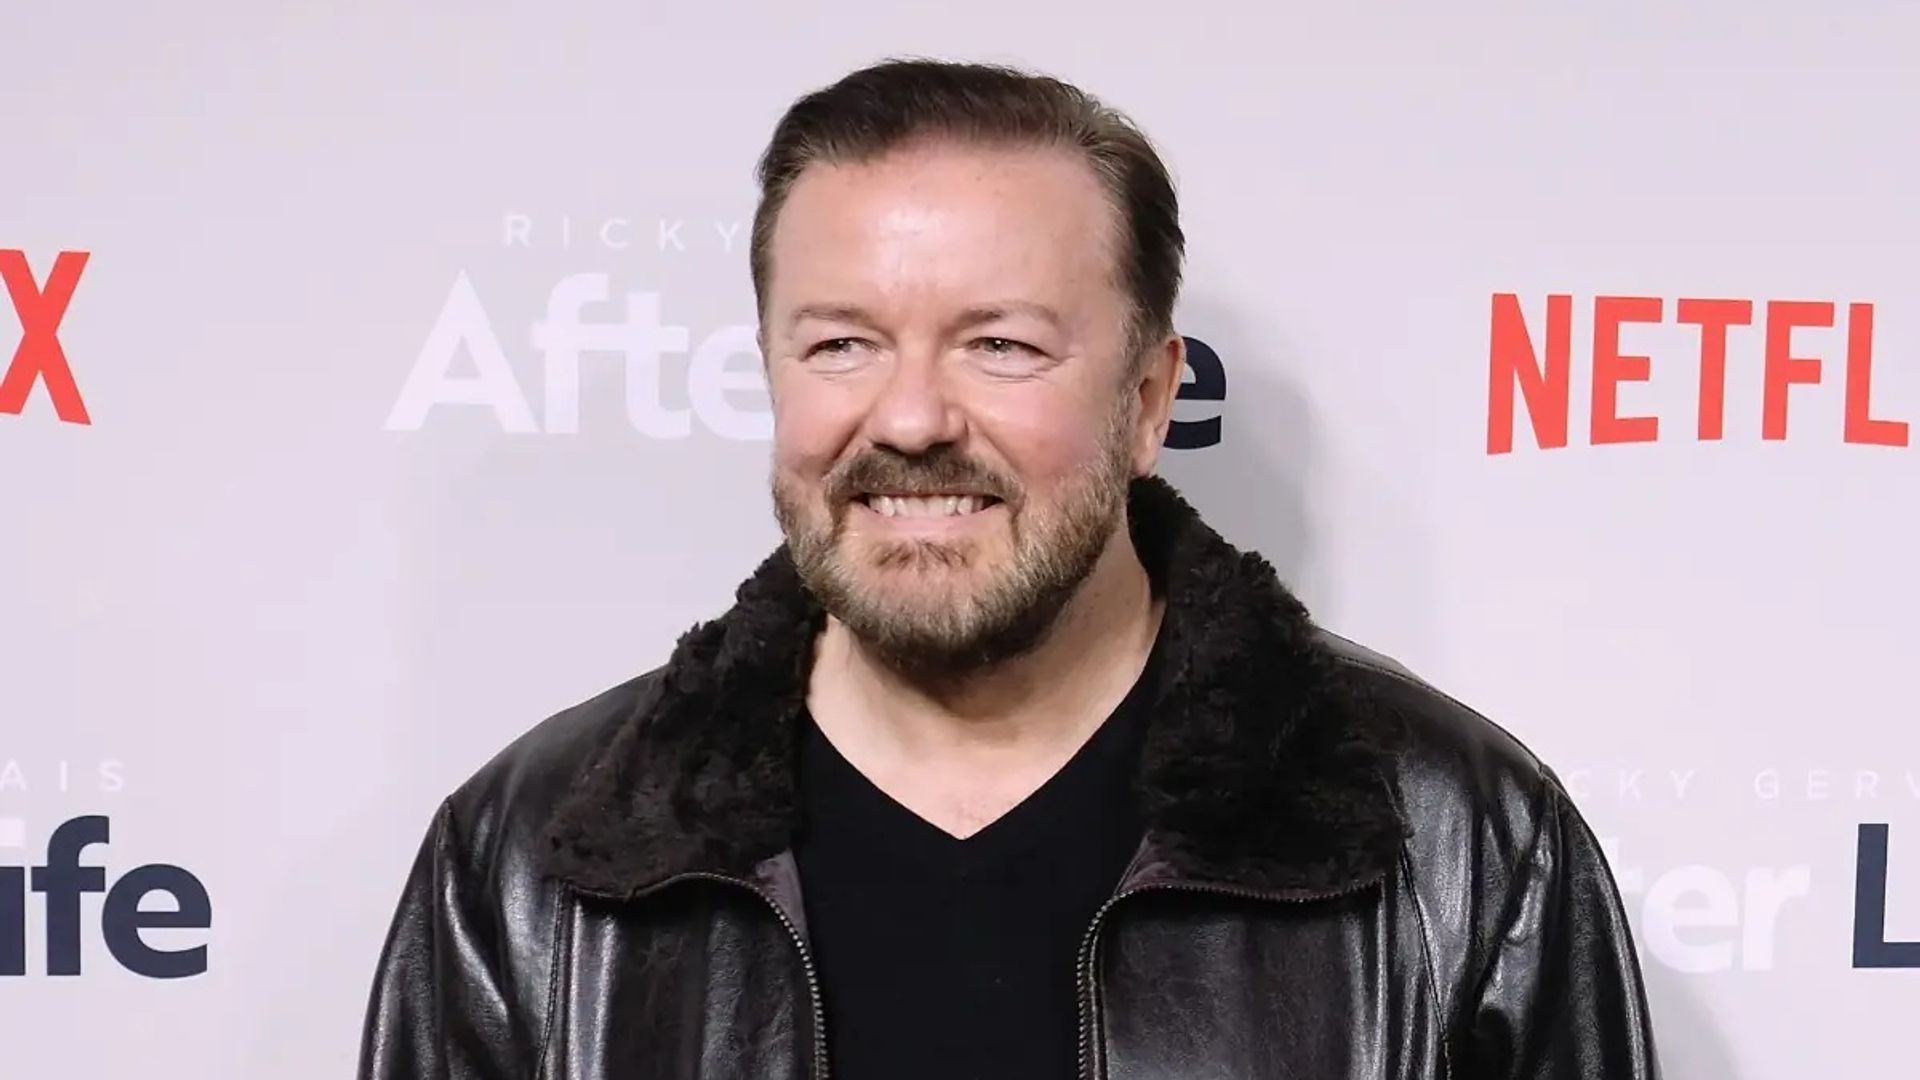 ricky gervais pic